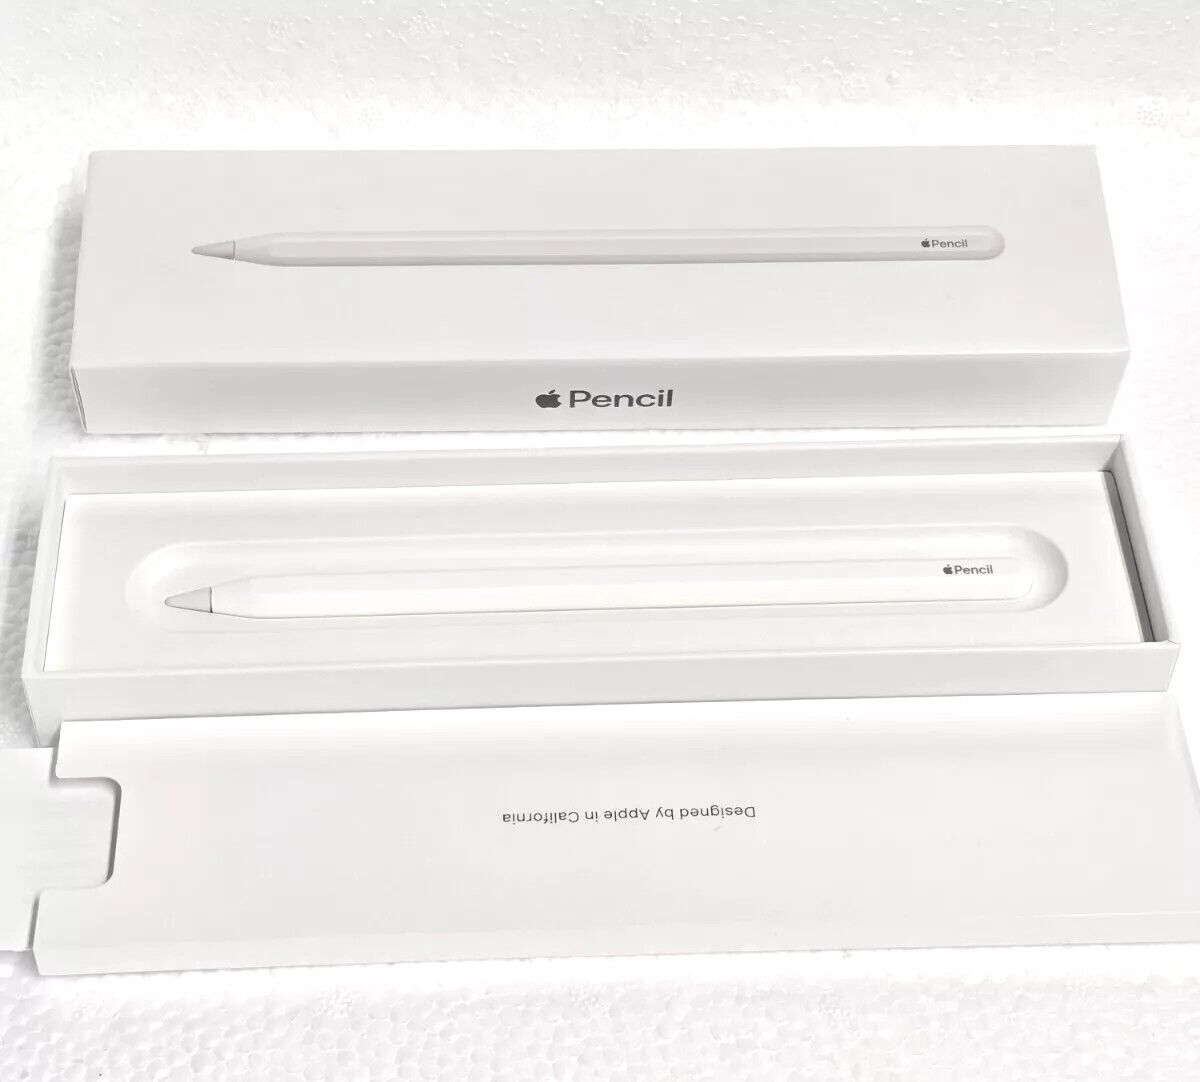 Apple Pencil (2nd Generation) White